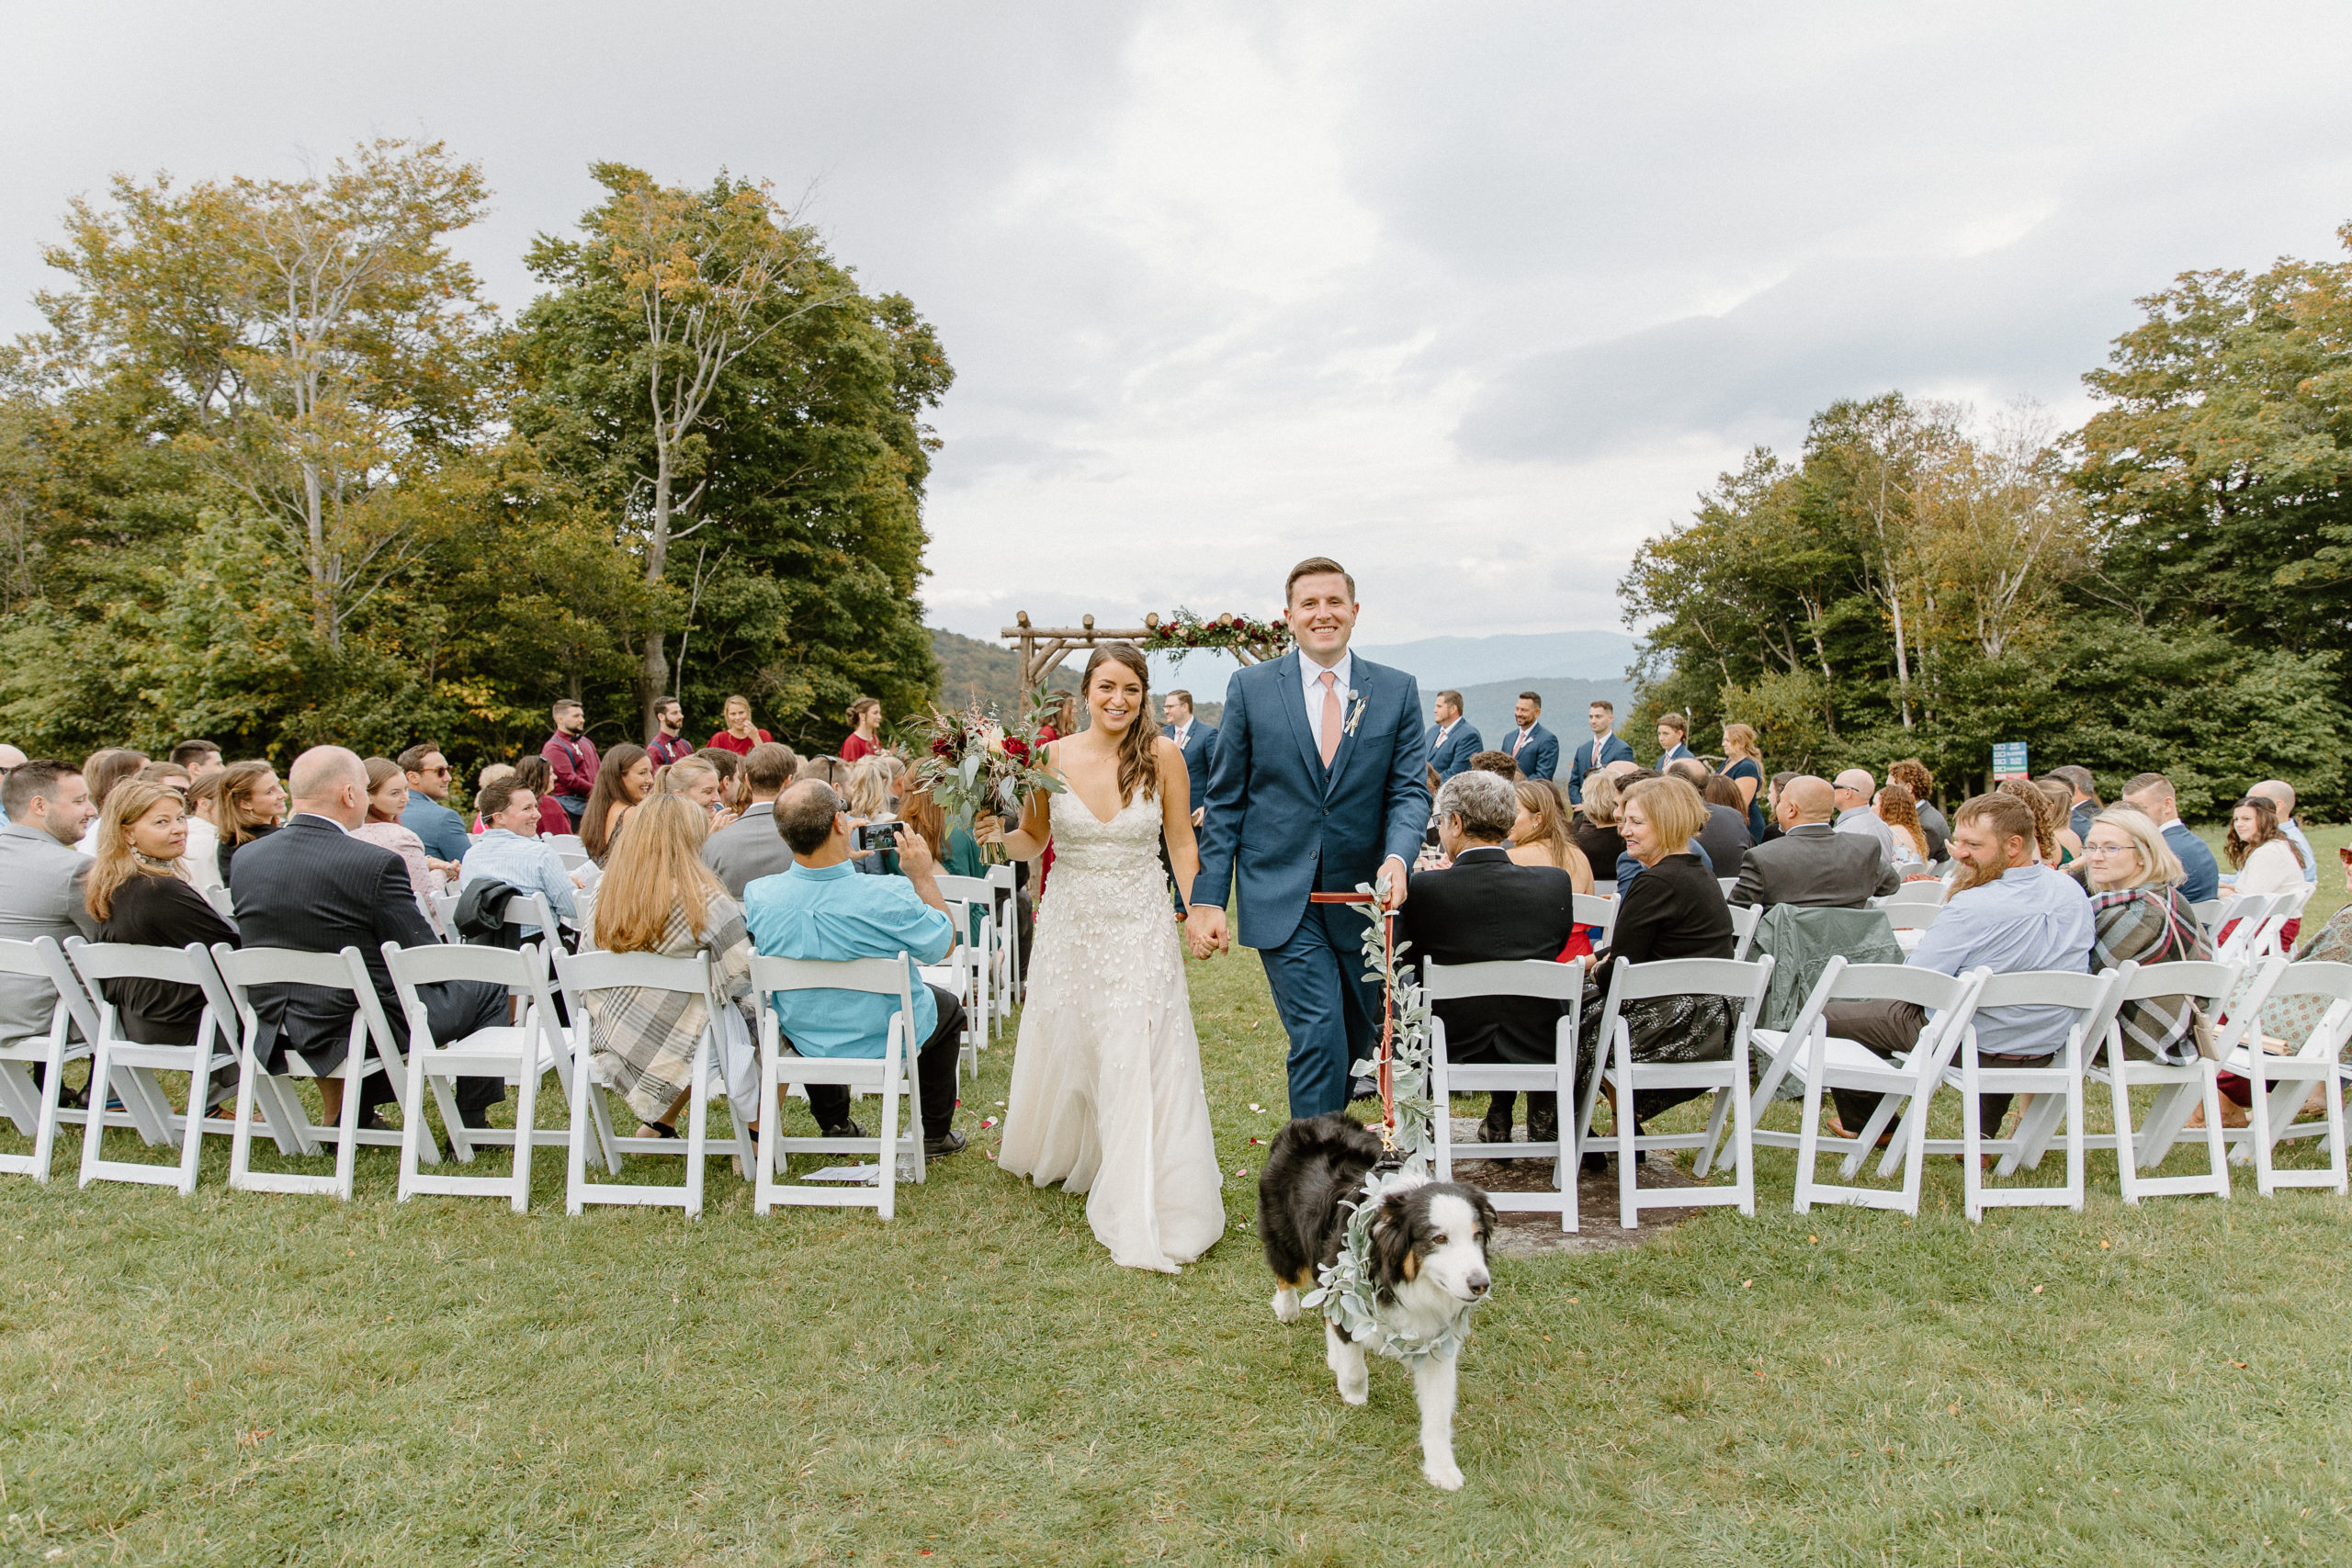 H&Amp;J Come Back Down The Aisle After Just Making Their Marriage Official At Their September Wedding At Sugarbush Resort.